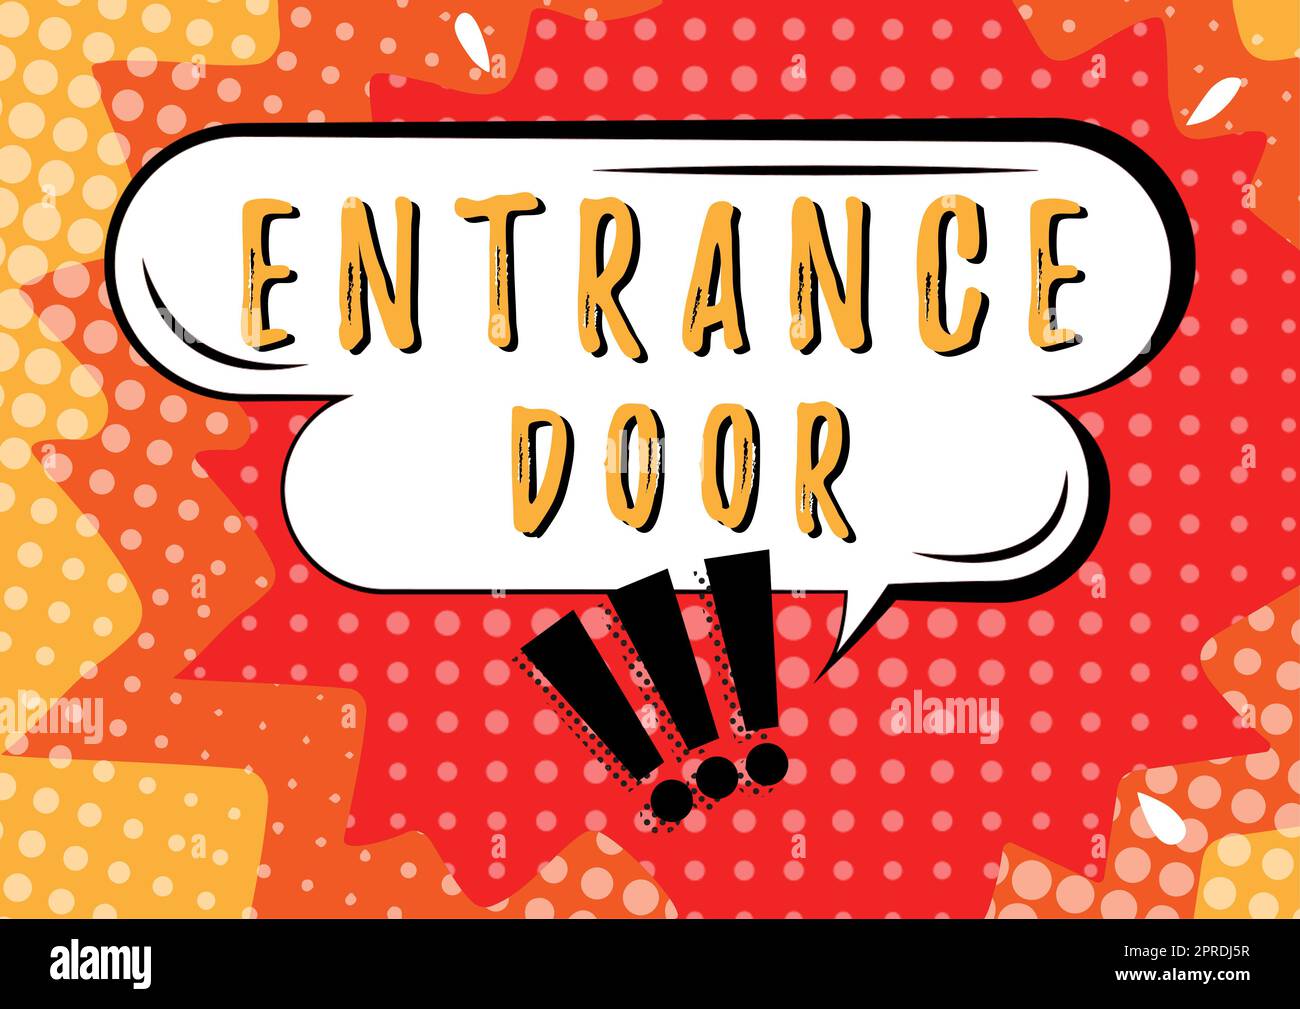 Hand writing sign Entrance Door. Word Written on Way in Doorway Gate Entry Incoming Ingress Passage Portal Chat Box And Exclamation Marks Representing Online Messaging. Stock Photo